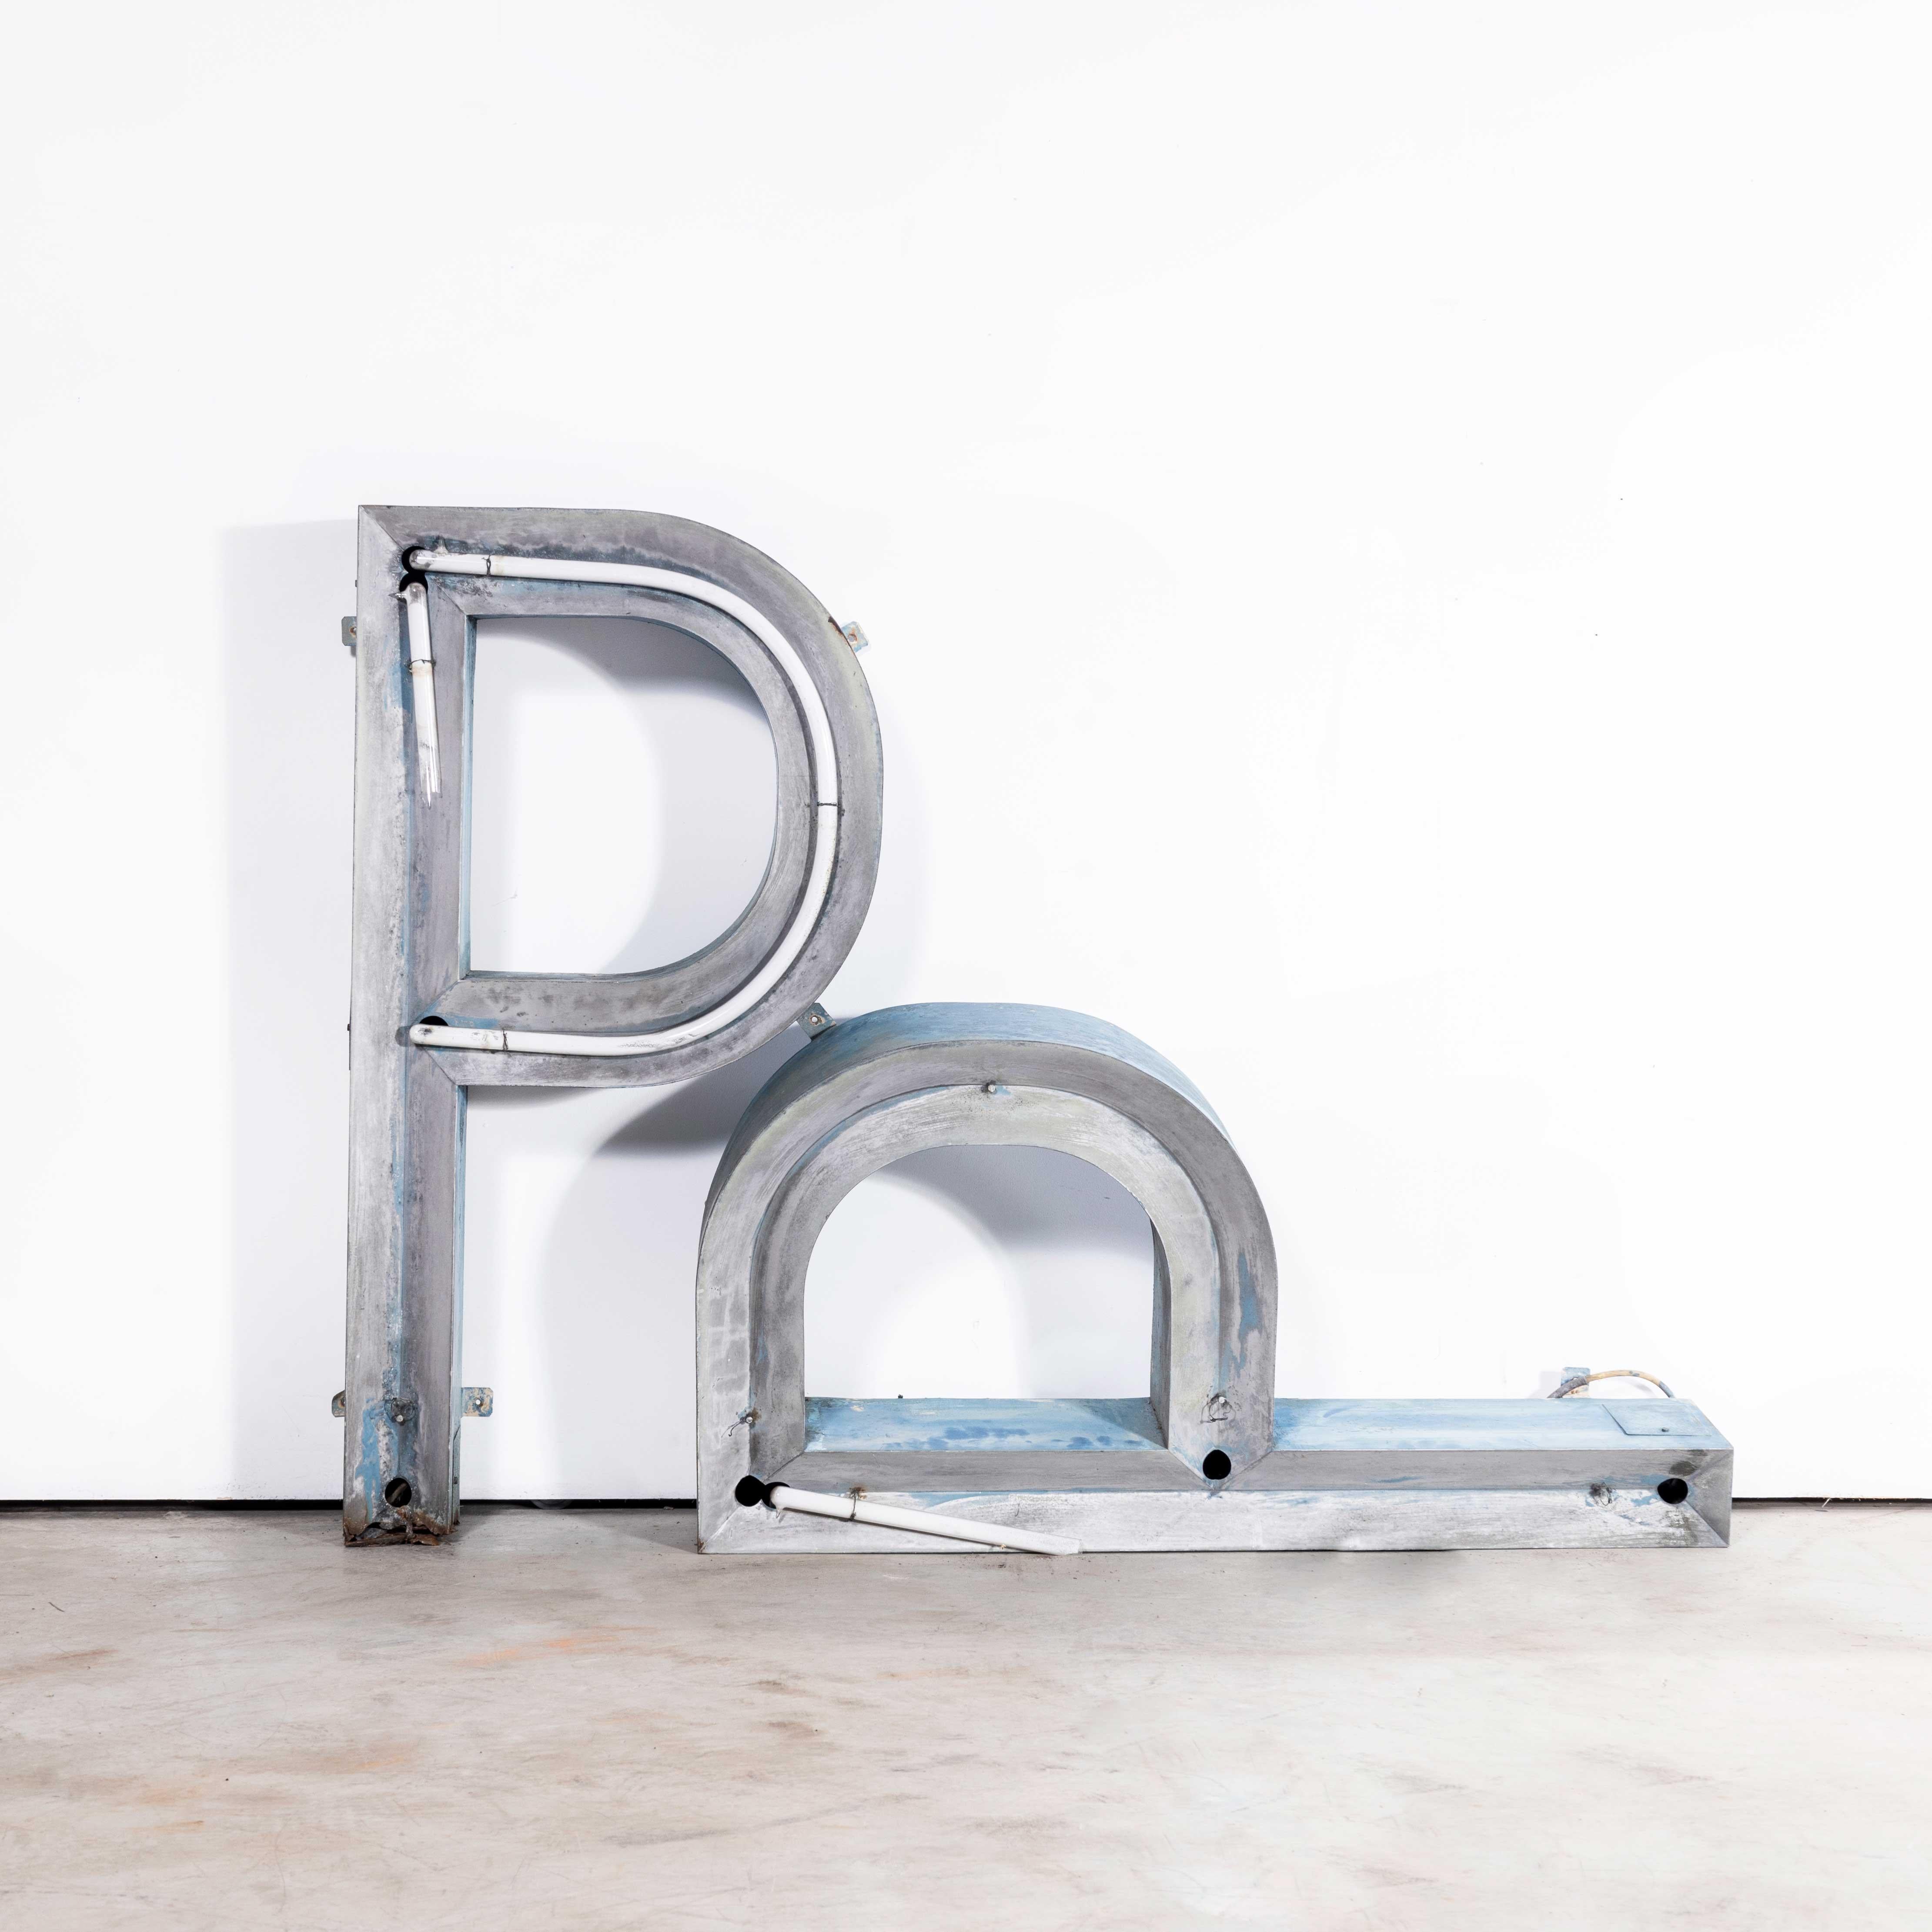 1950’s Very Large Original Sign Letter P – One Meter High.
1950’s Very Large Original Sign Letter P – One Meter High. Made from galvanised sheet metal with the original faded paint. We have kept as much of the original neon glass tubing but please